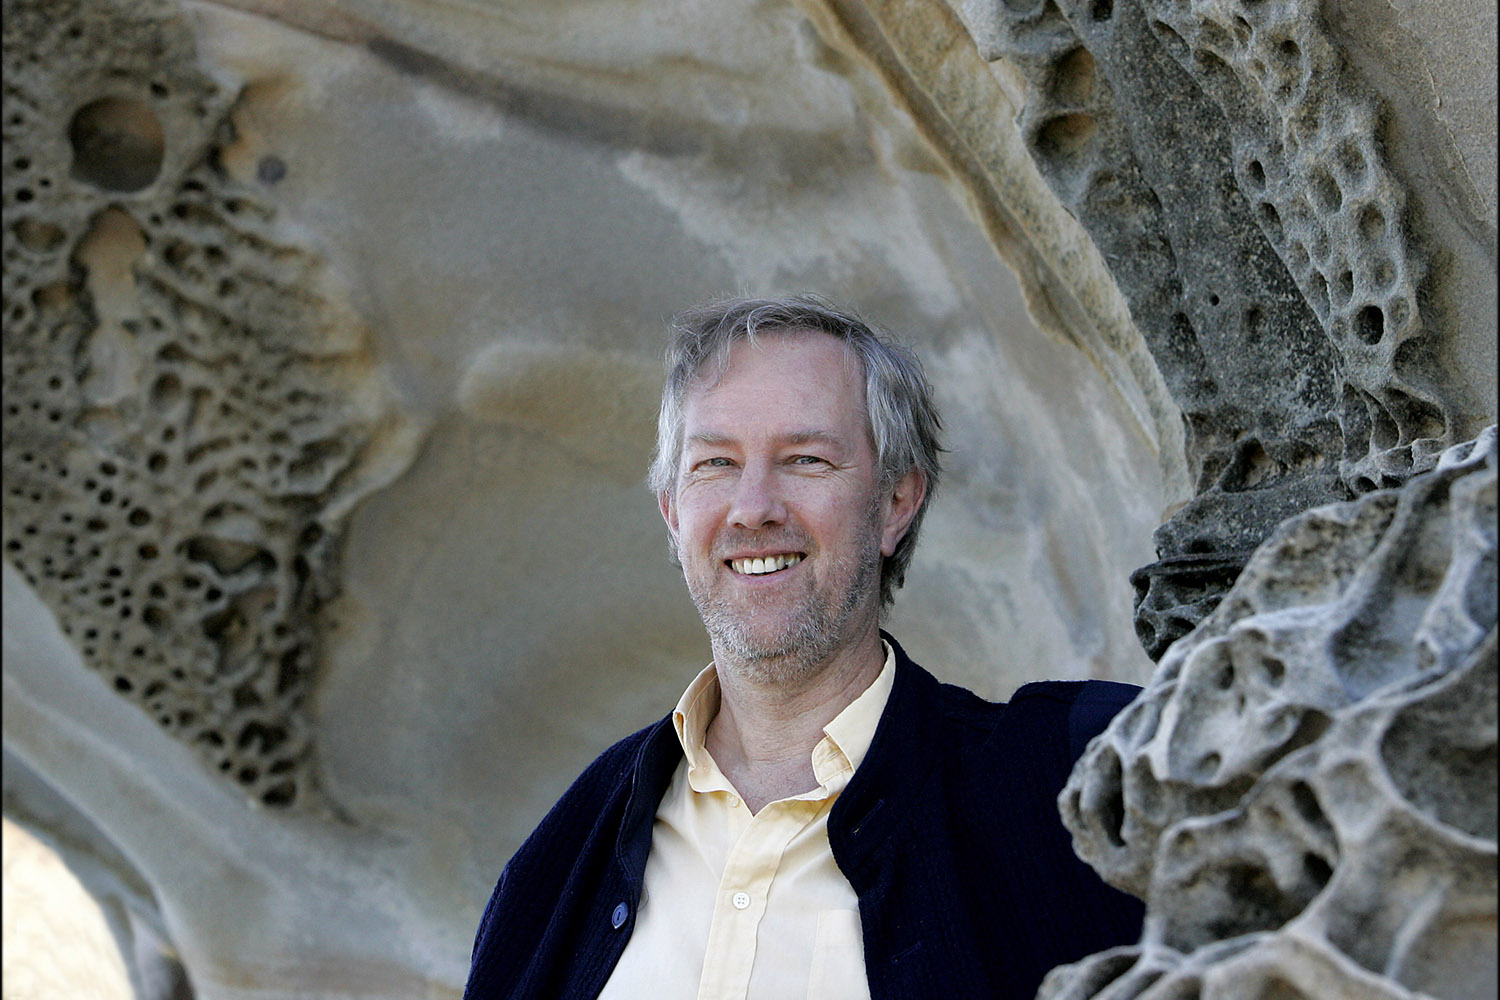 A man with grey hair smiling in front of a stone structure